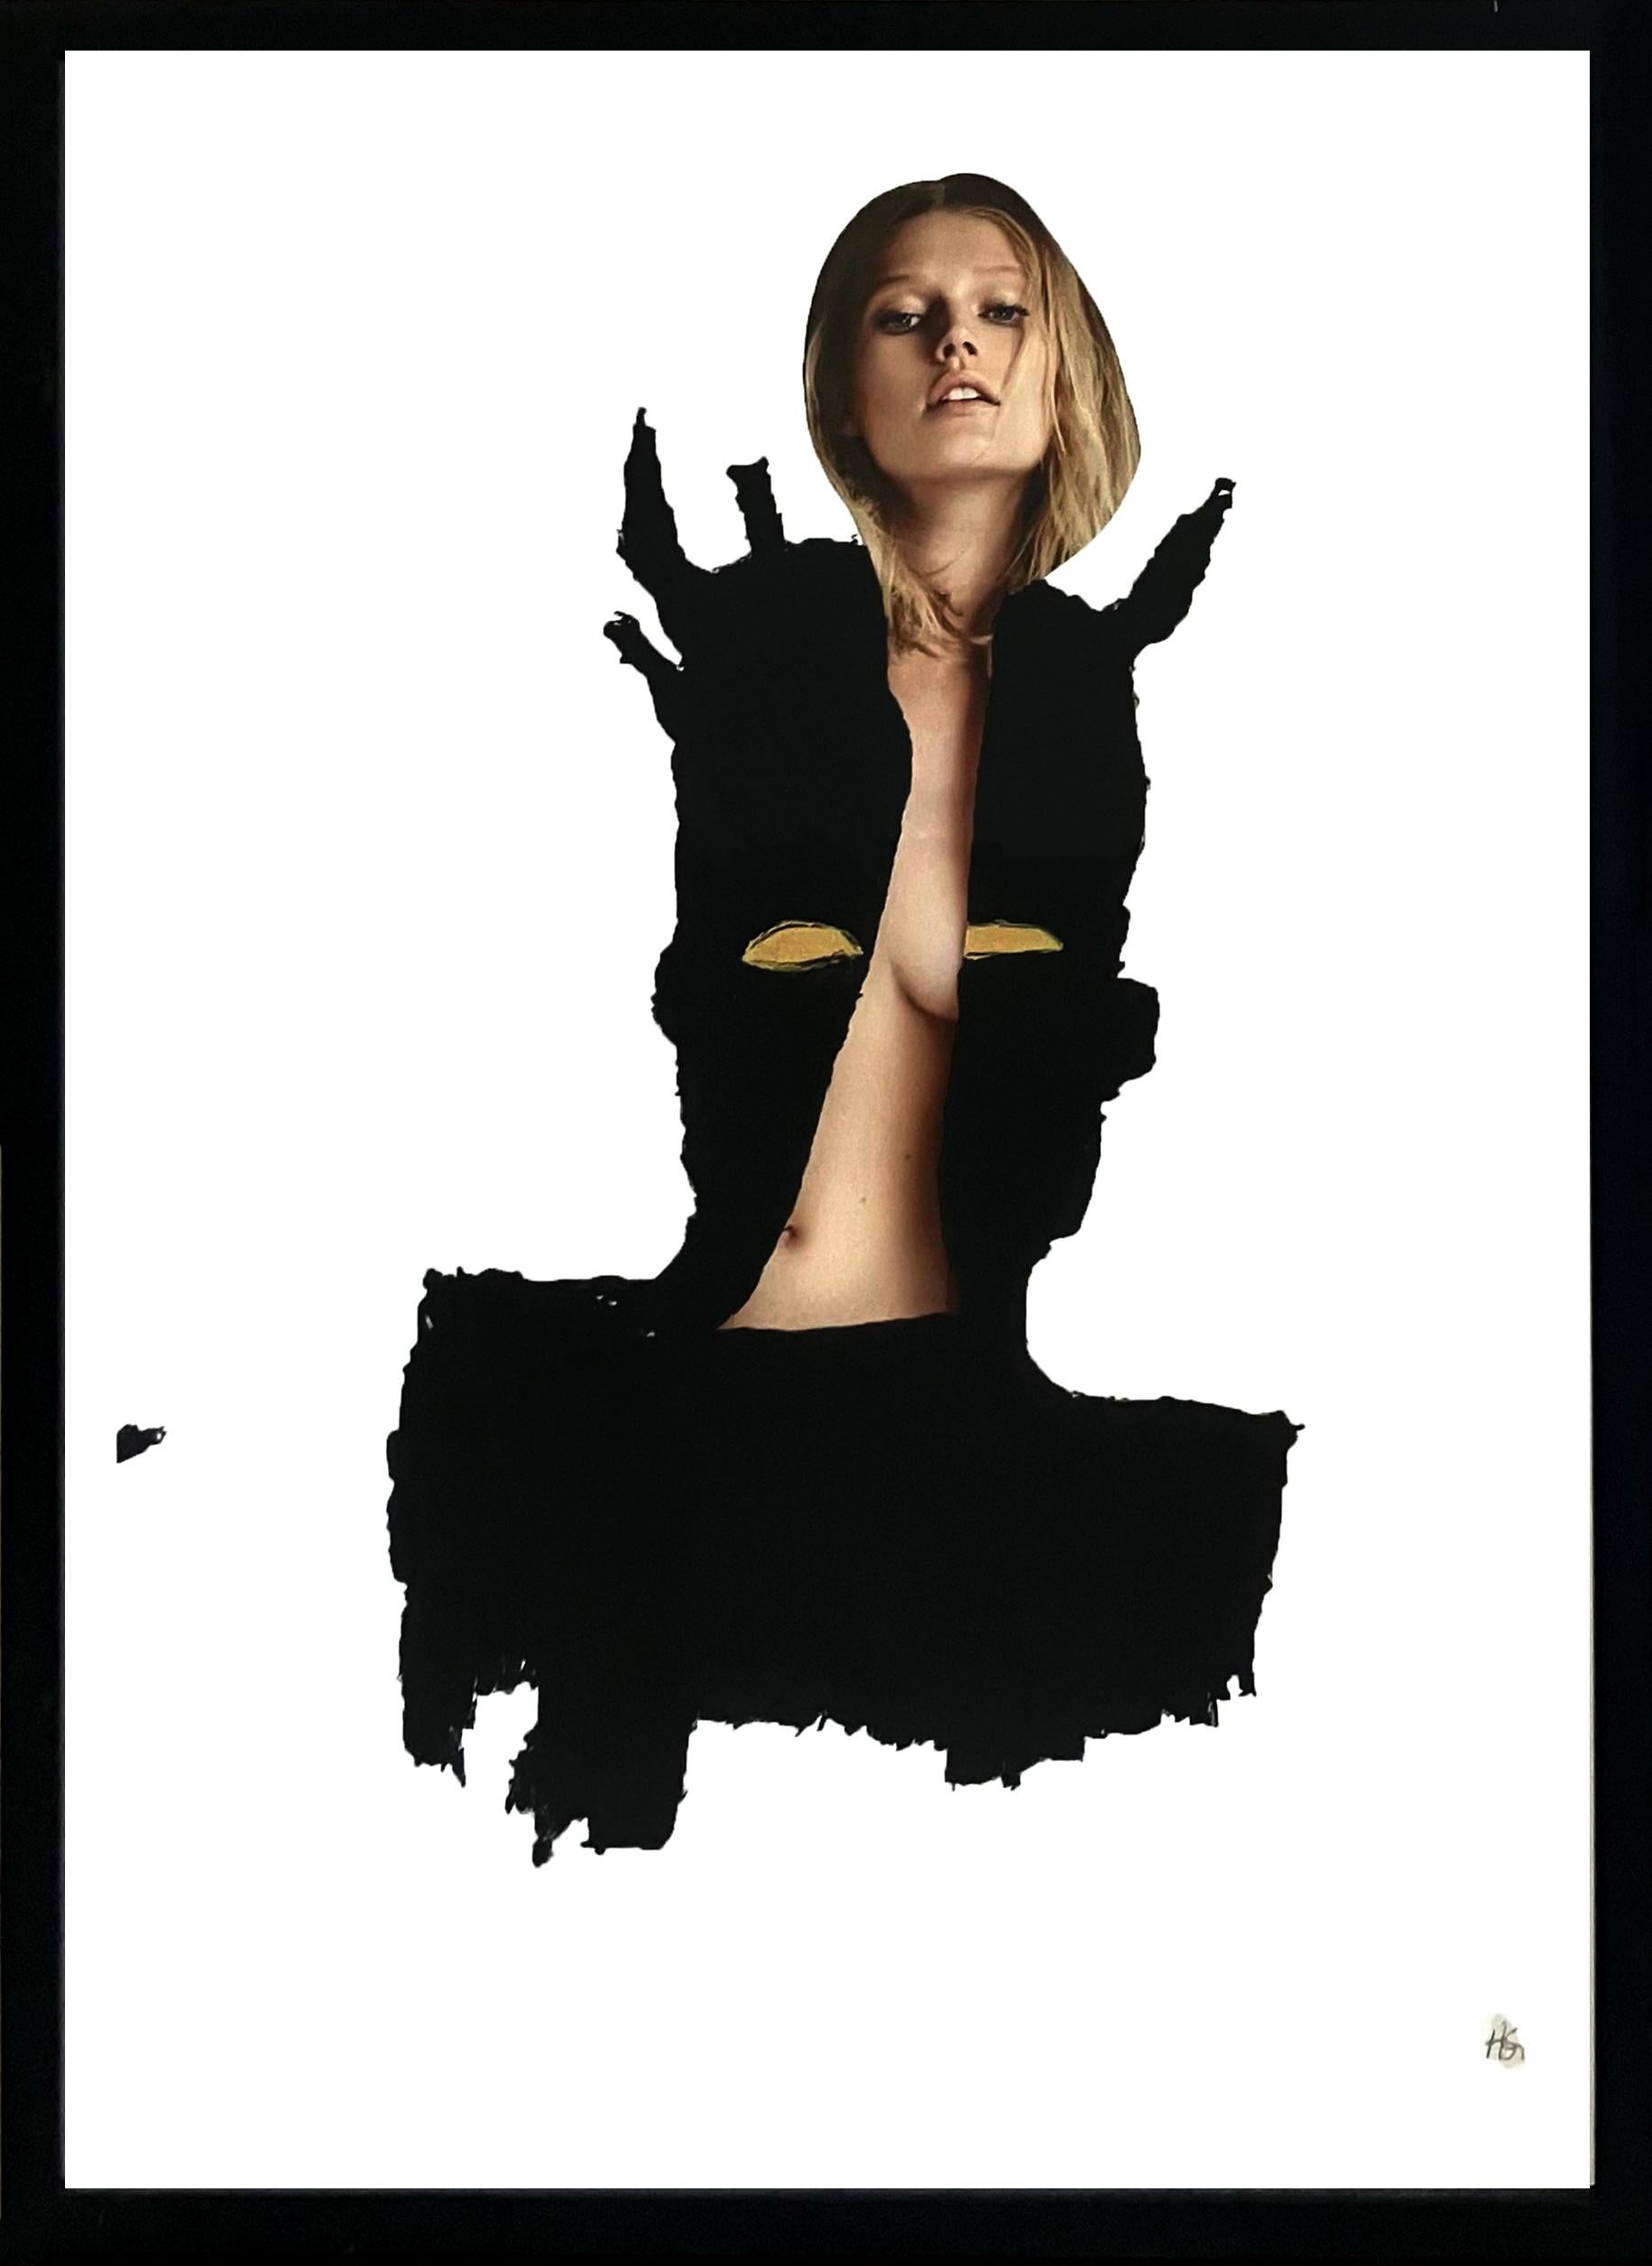 Gold Griot, Mixed  Media fashion Photograph. From The Series Fact Sheet